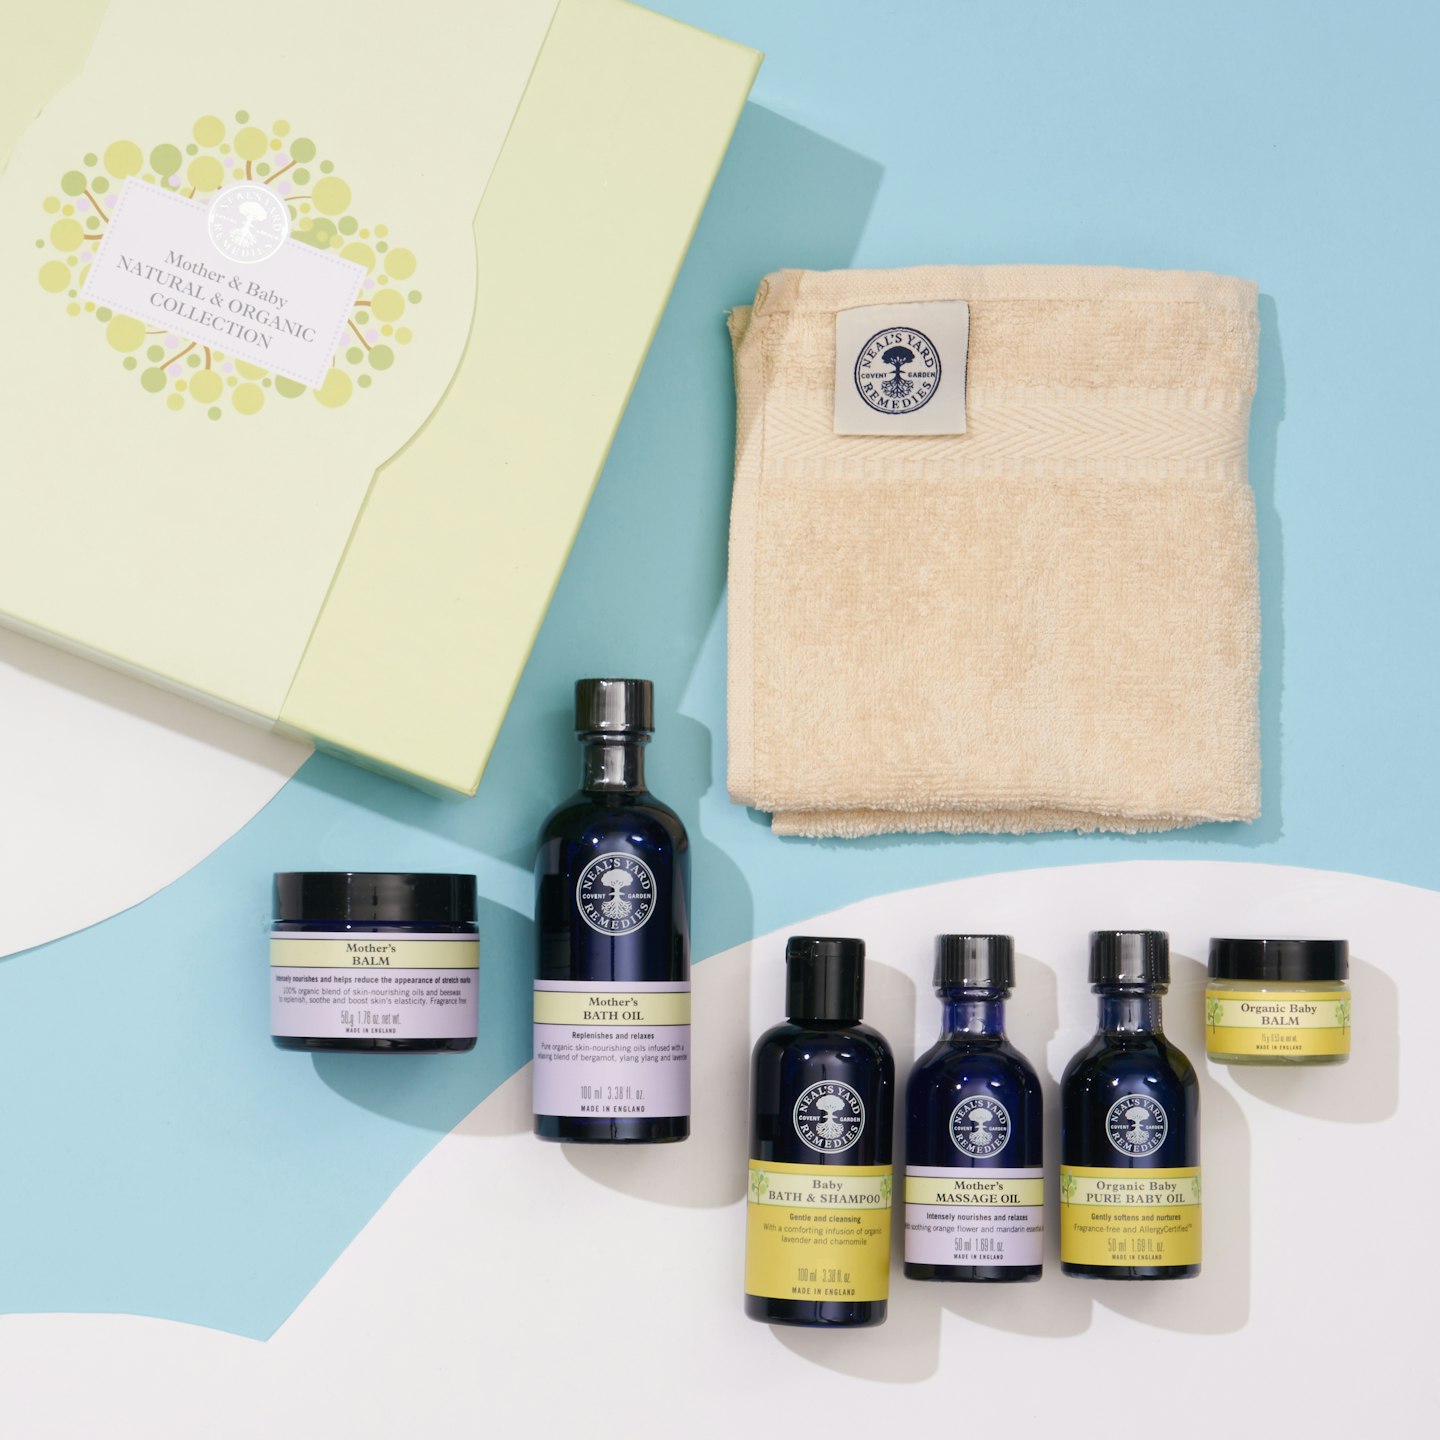 mum to be gifts  New MumNealu2019s Yard Remedies, Mother and Baby Collection, £45